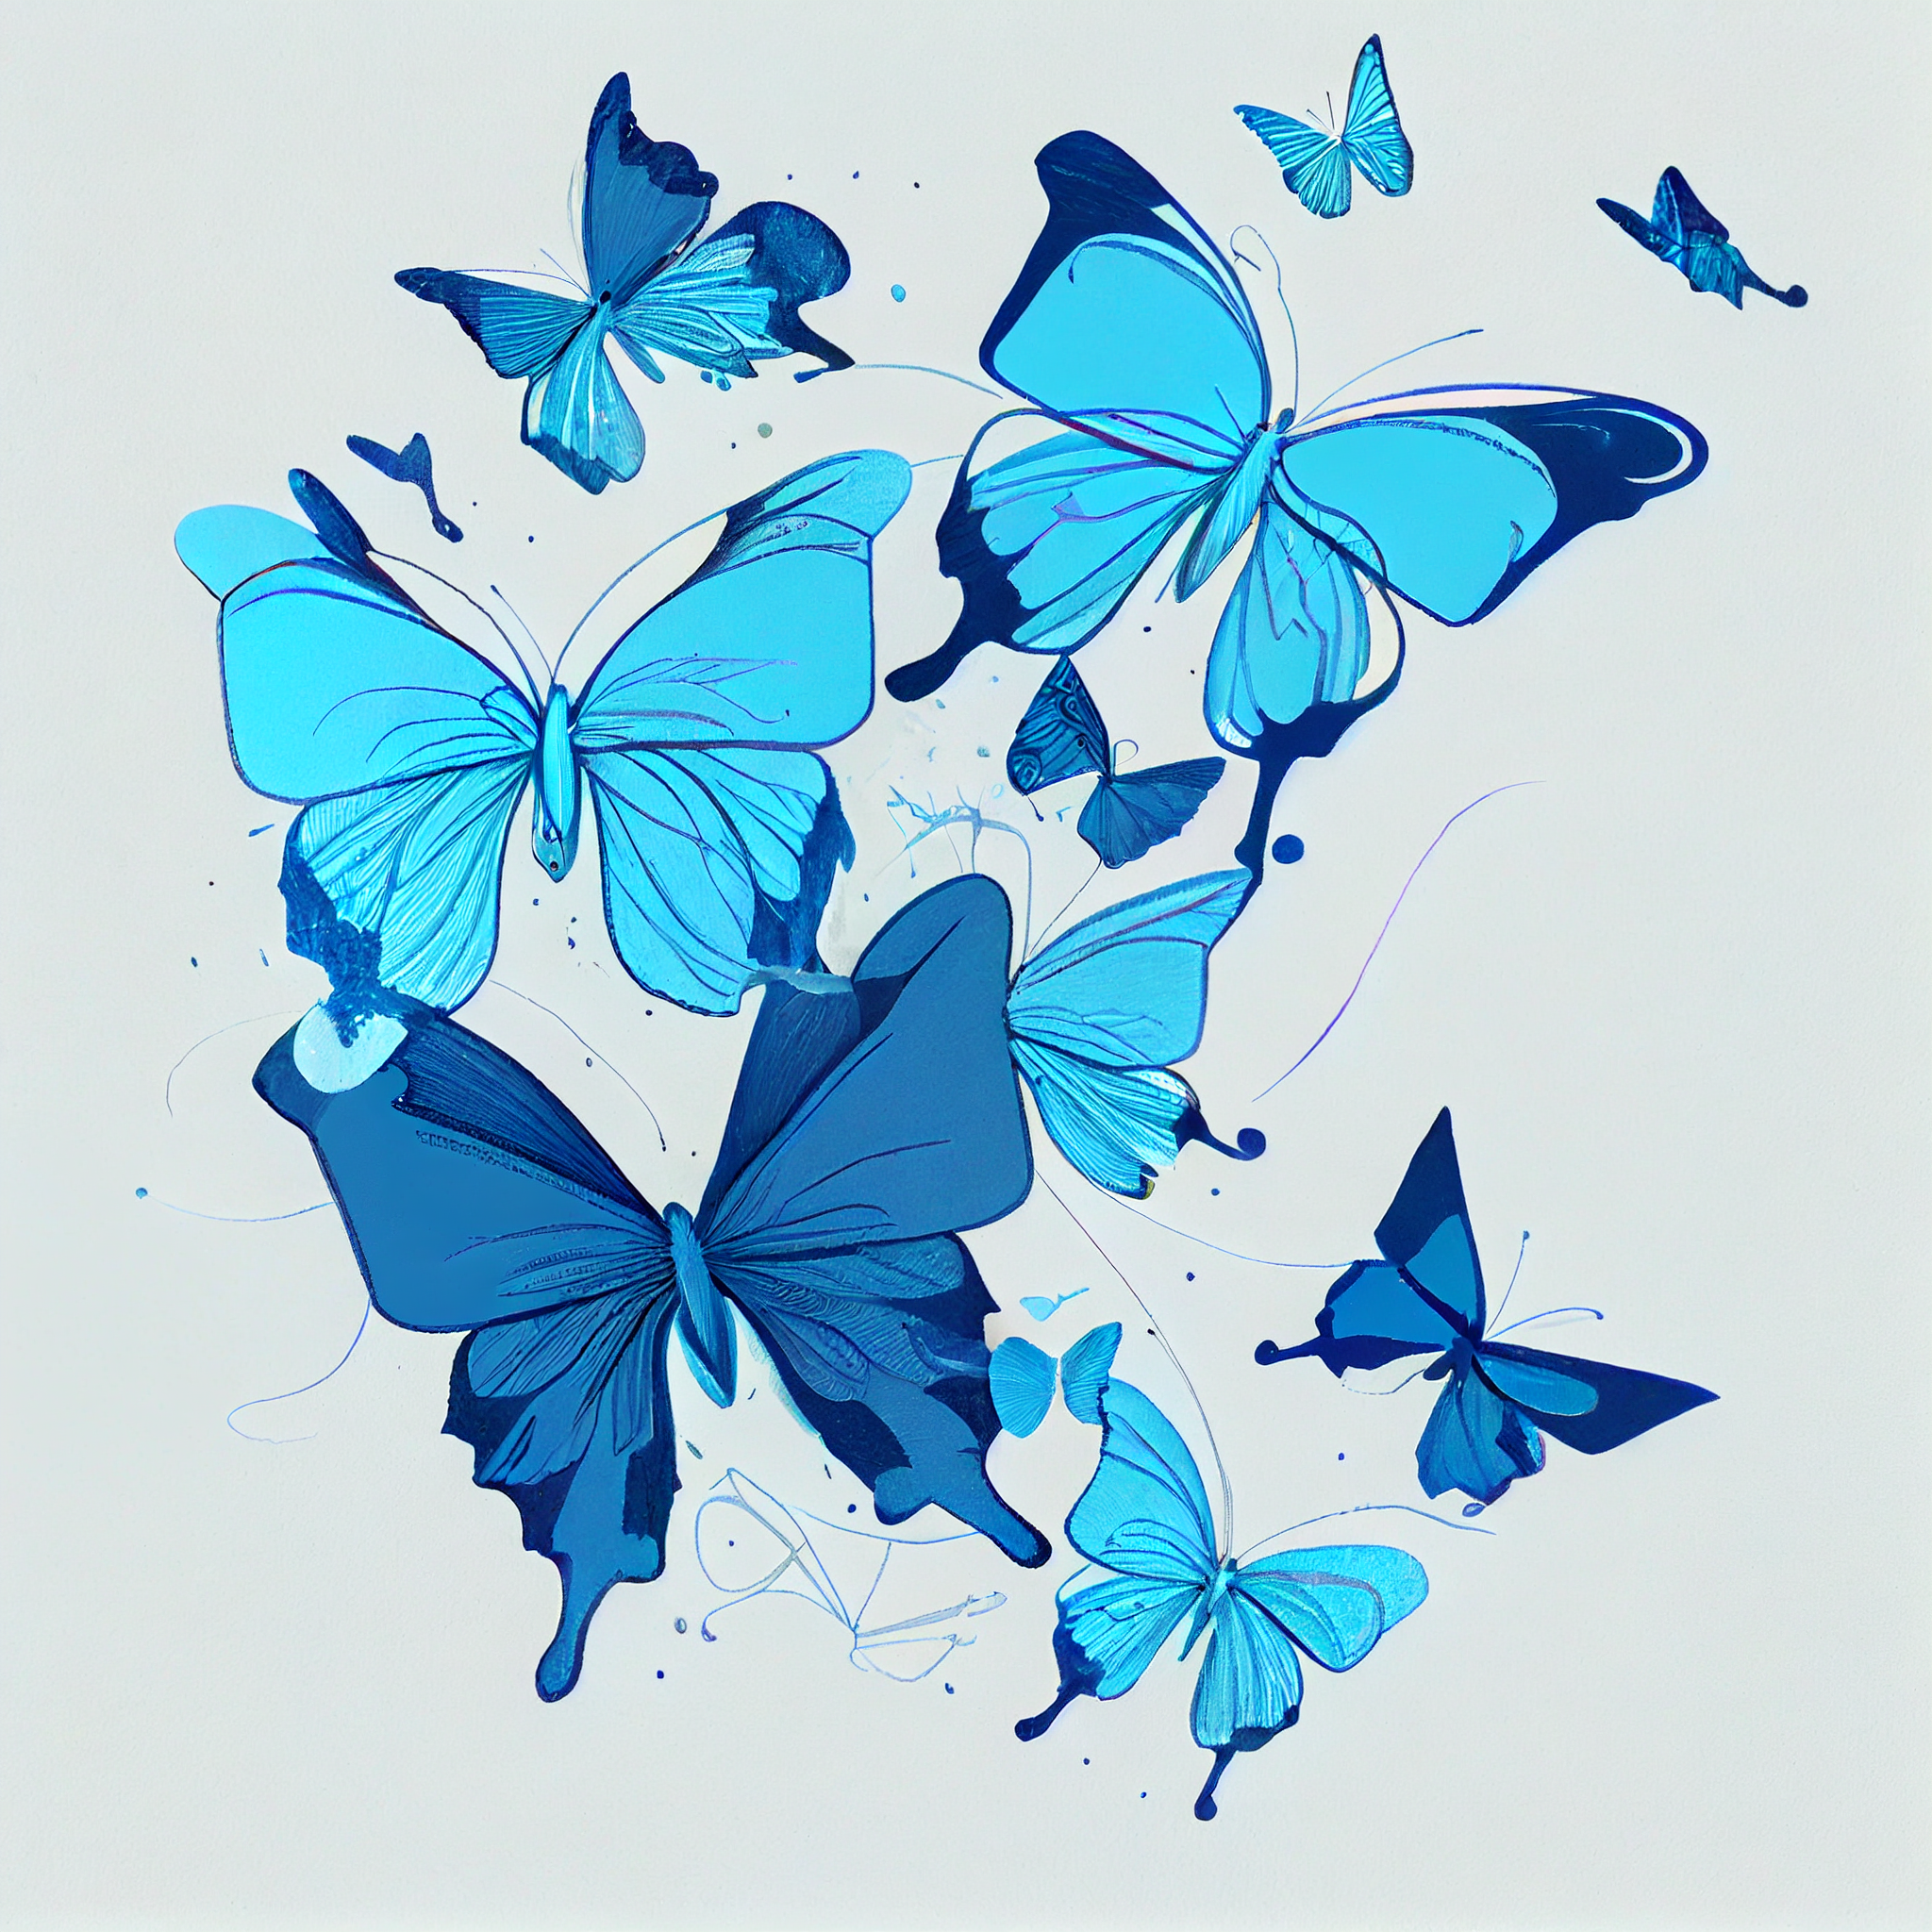 Fluttering Beauty: Adorn Your Space with Line Art of Flying Blue Butterflies Print